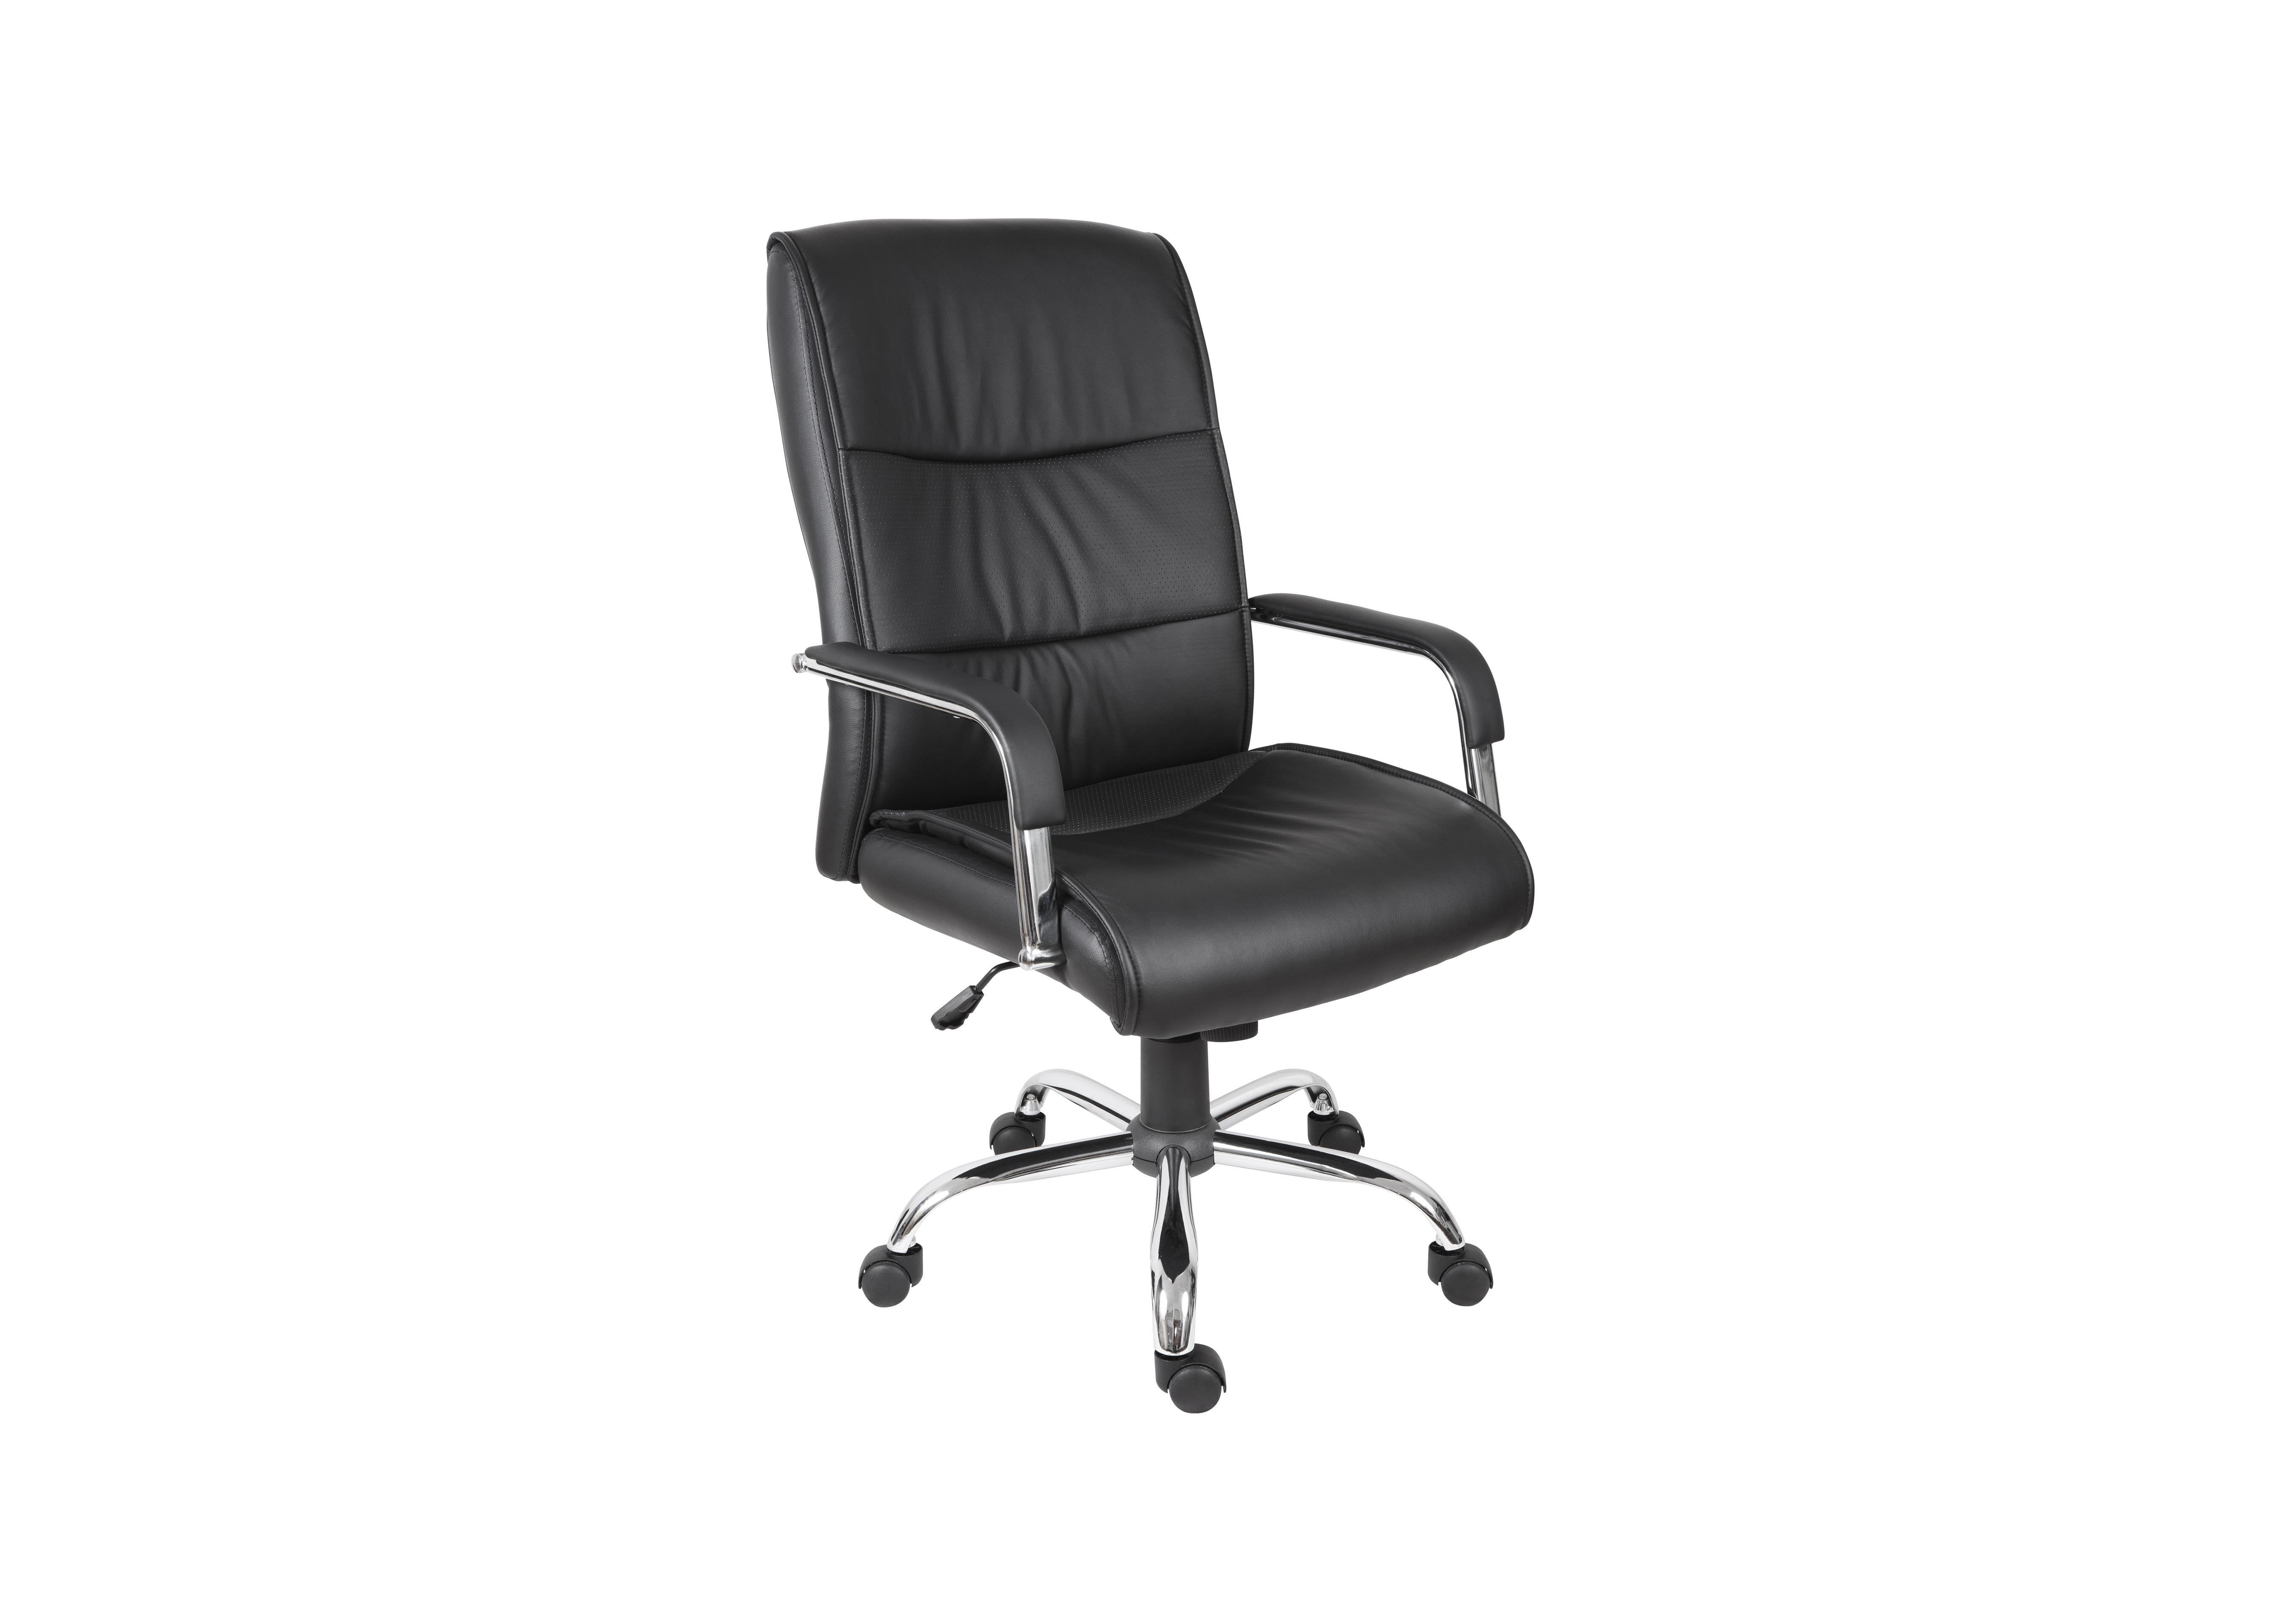 East River Pier 16 Office Chair - Furniture Village